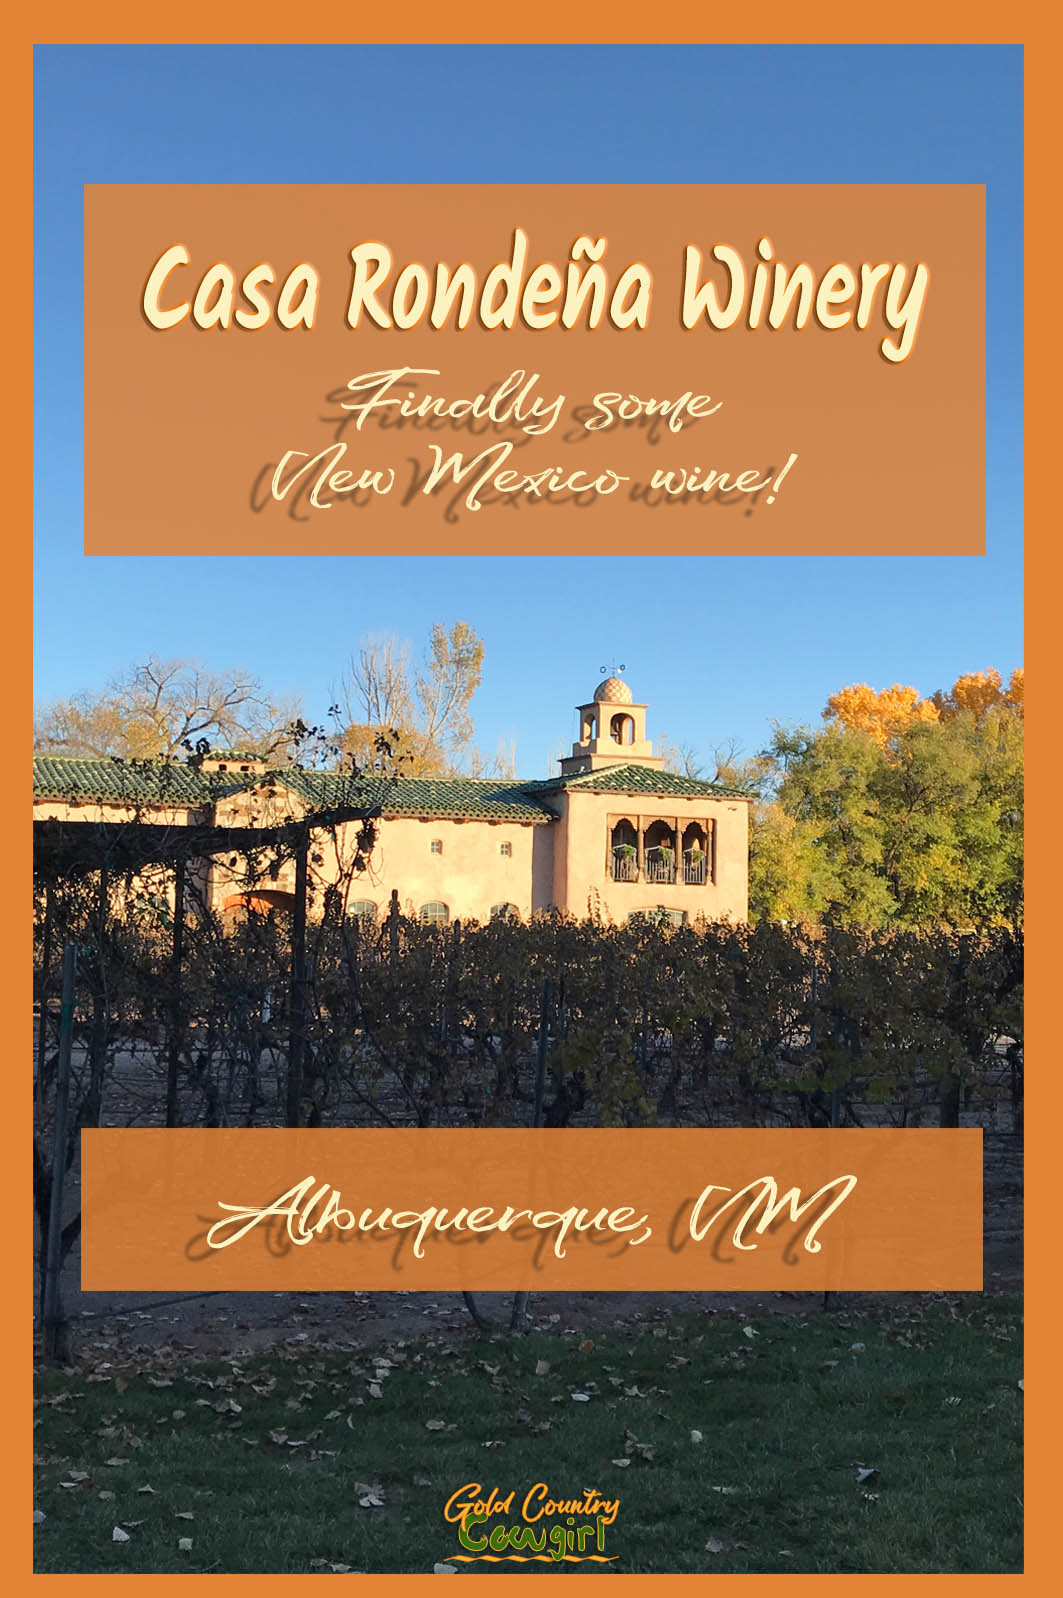 Casa Rondeña Winery title graphic v